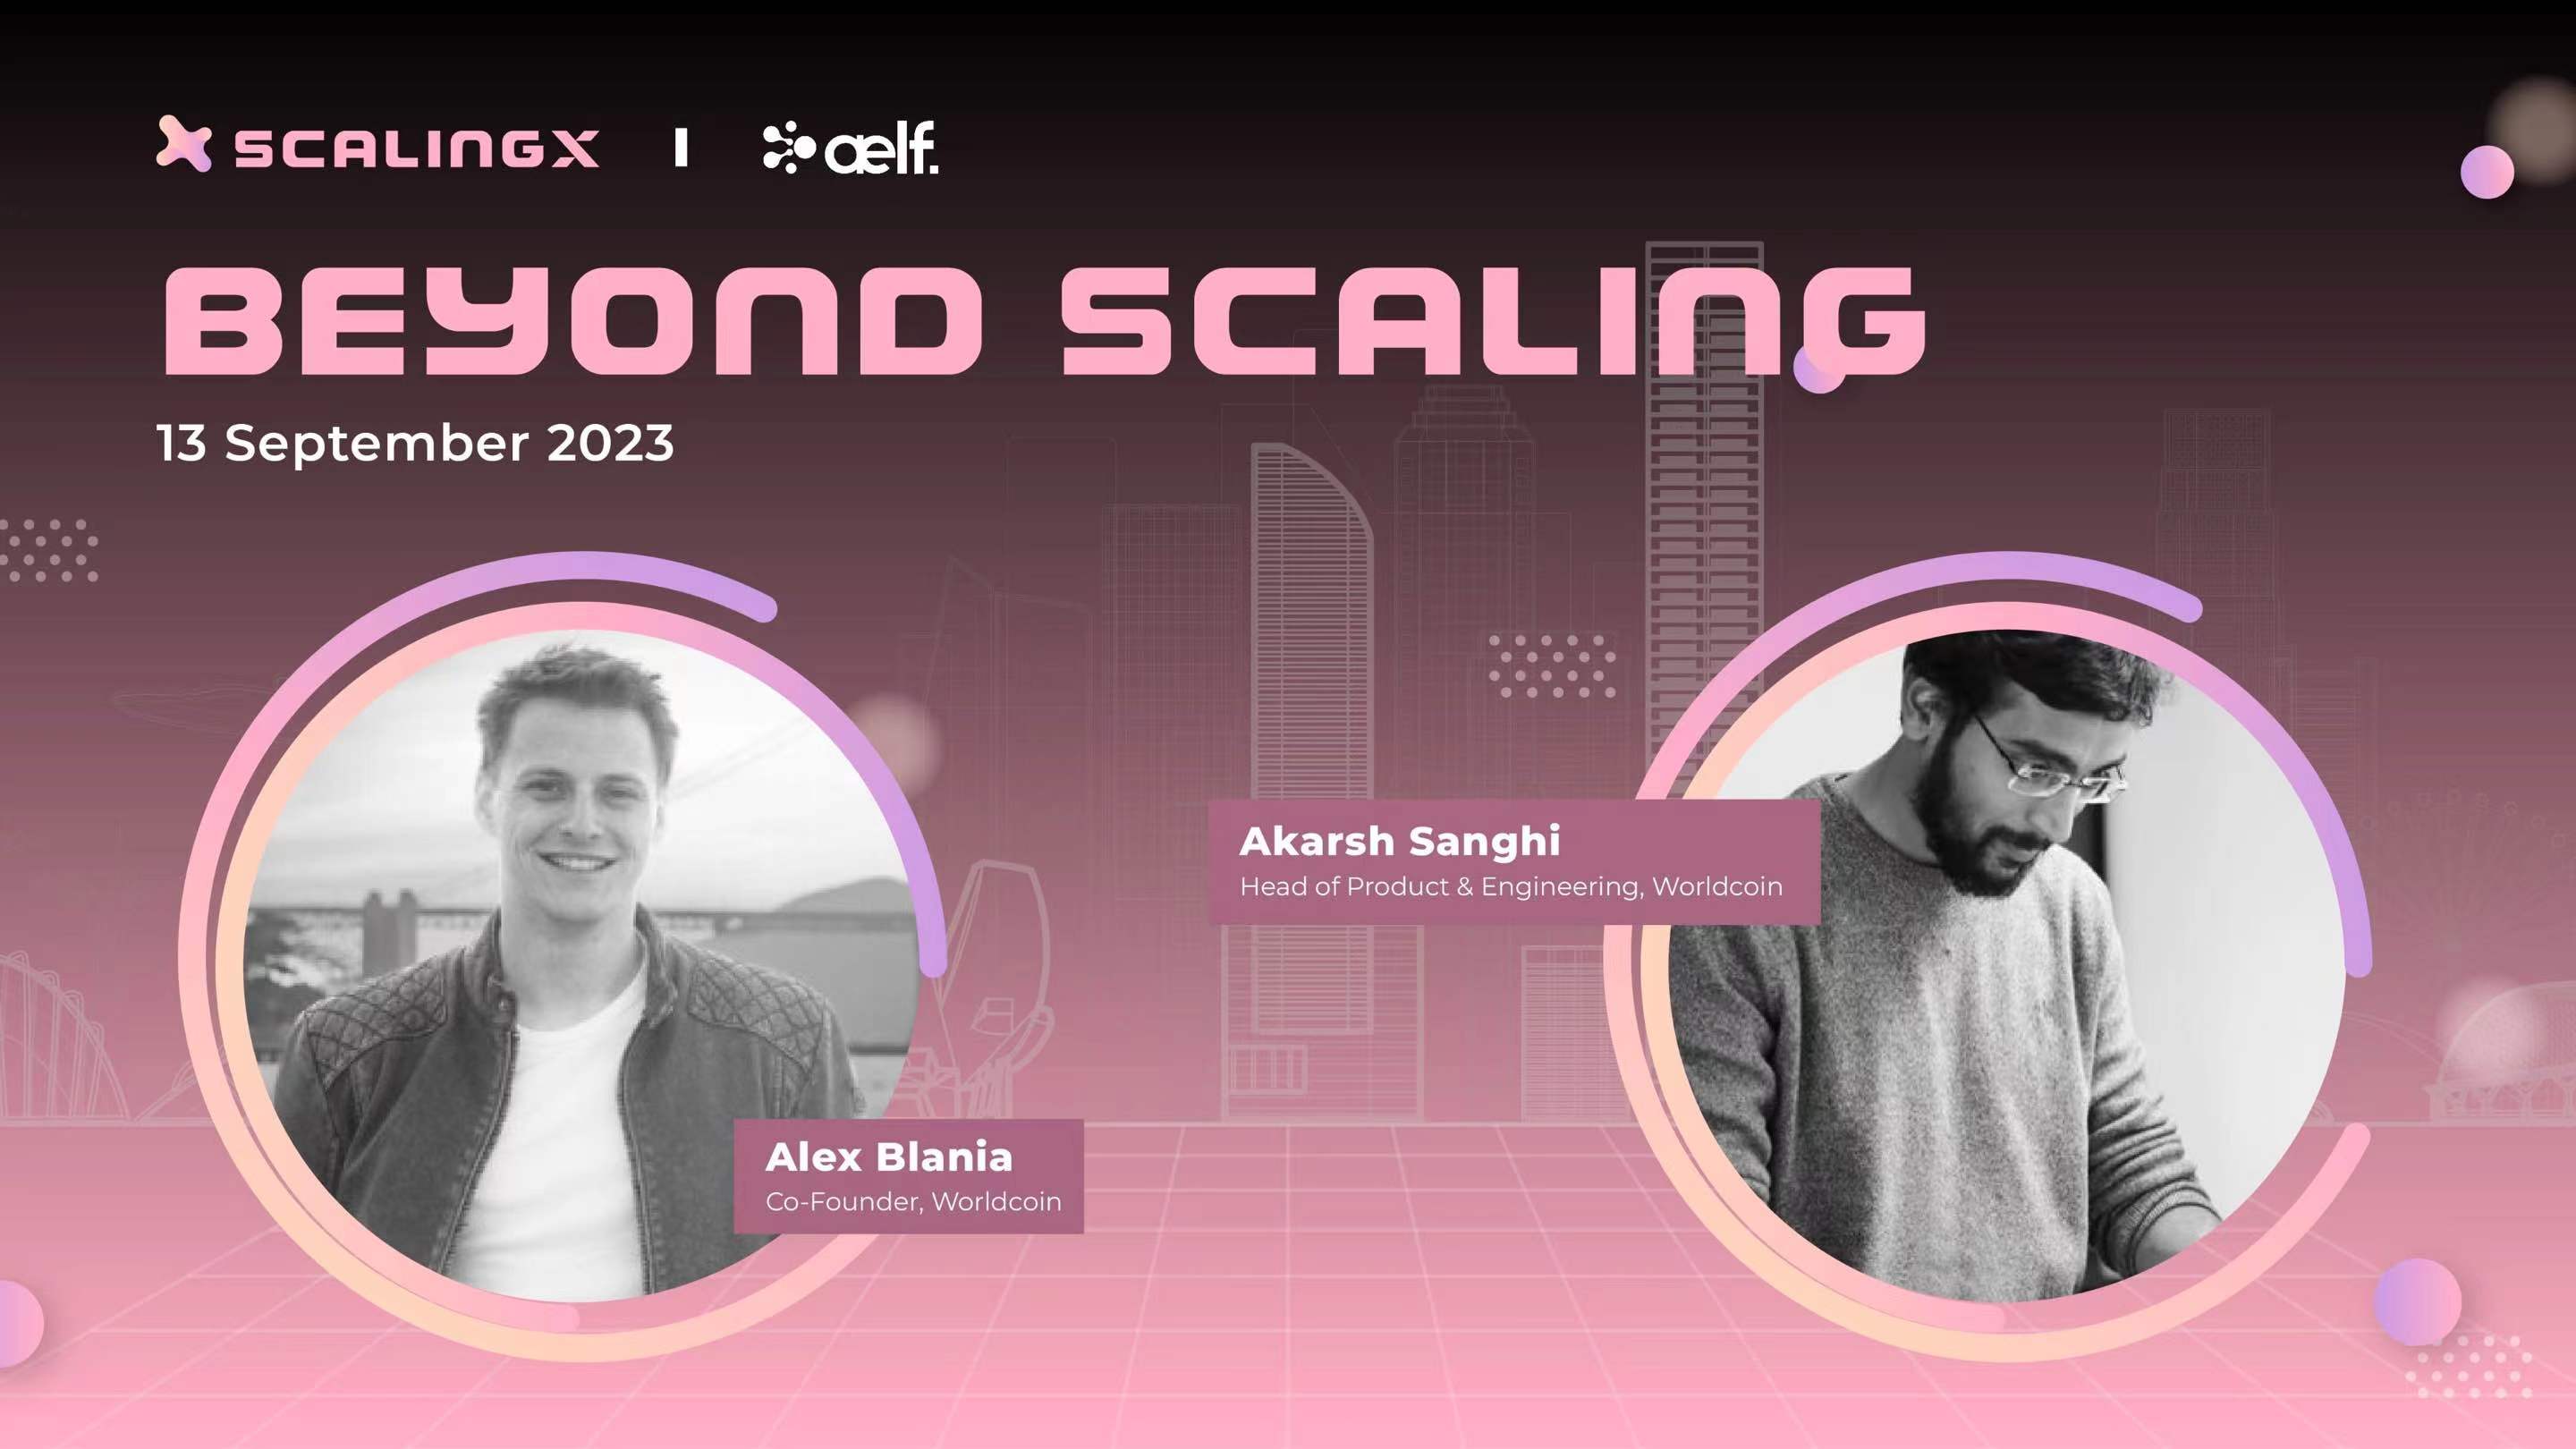 Worldcoin 联合创始人, Alex Blania 确认出席 “Beyond Scaling” Token 2049 Afterparty 活动